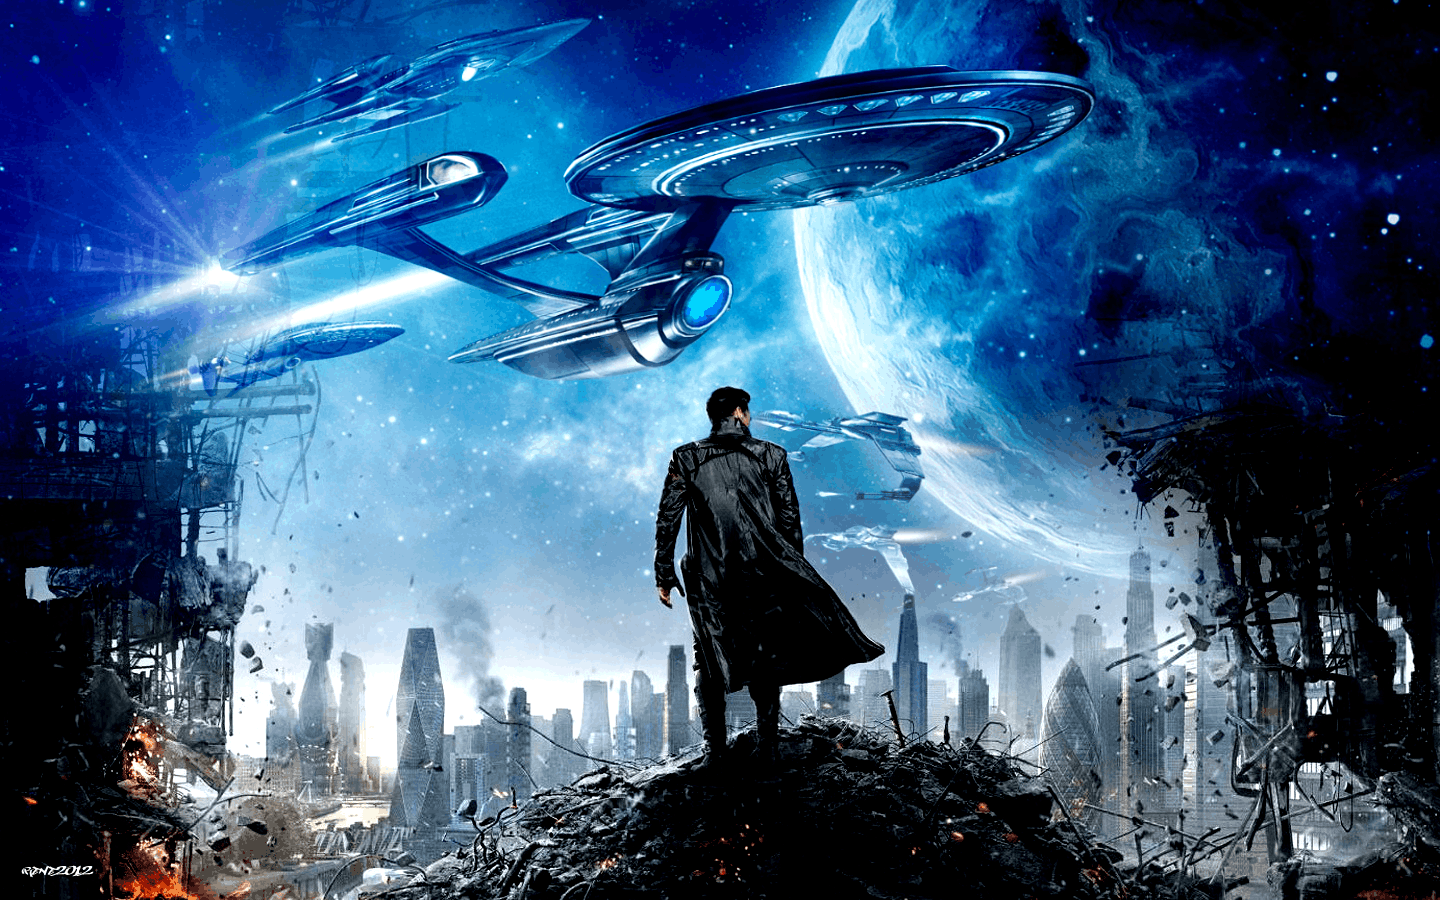 KIDS FIRST!: Review of Star Trek into Darkness By Patrick Nguyen